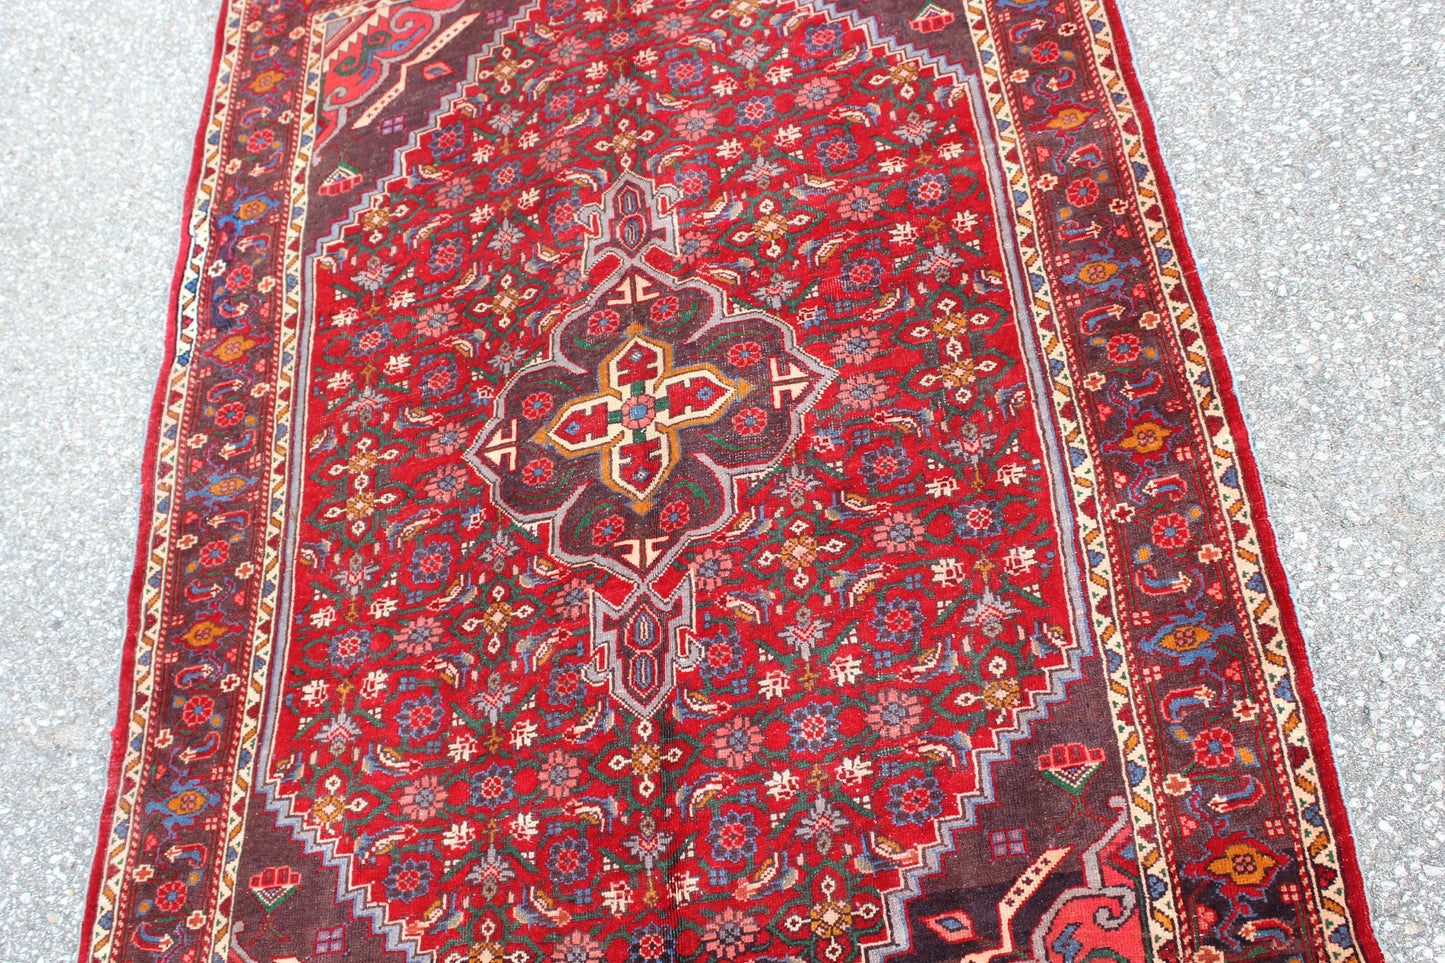 Rug 3'5" x 5'5" Red with Blue Vintage Accents Handmade Rug